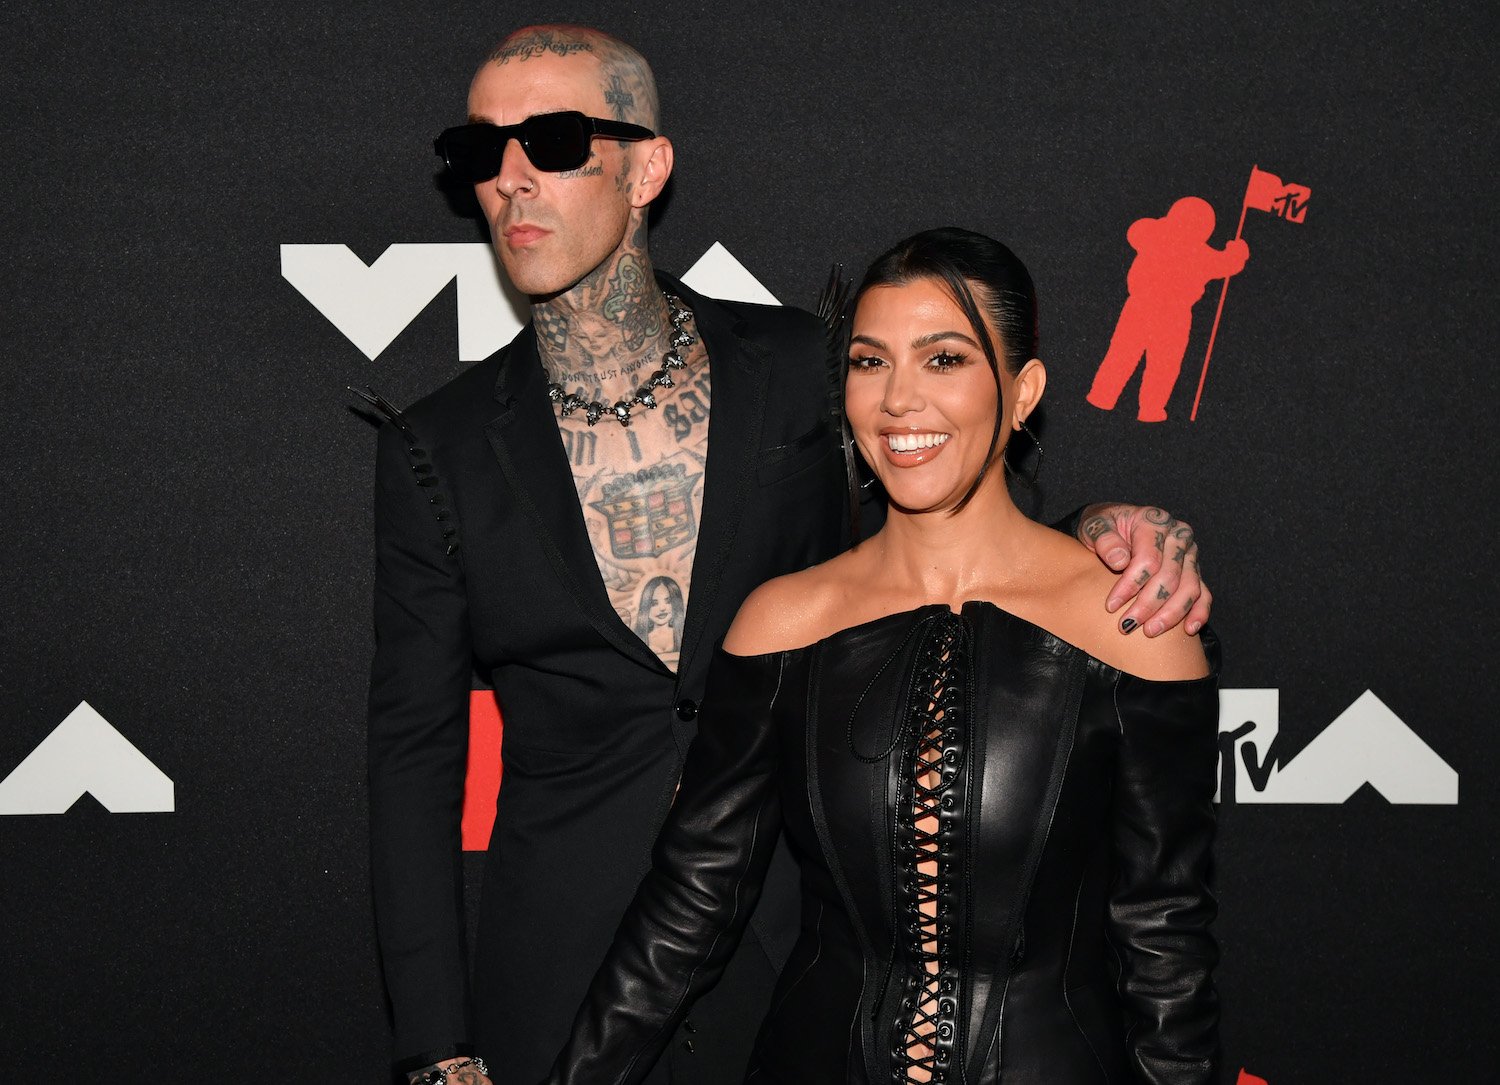 Travis Barker wears a black suit without a shirt and Kourtney Kardashian wears a black lace up dress on the red carpet at the 2021 MTV Video Music Awards